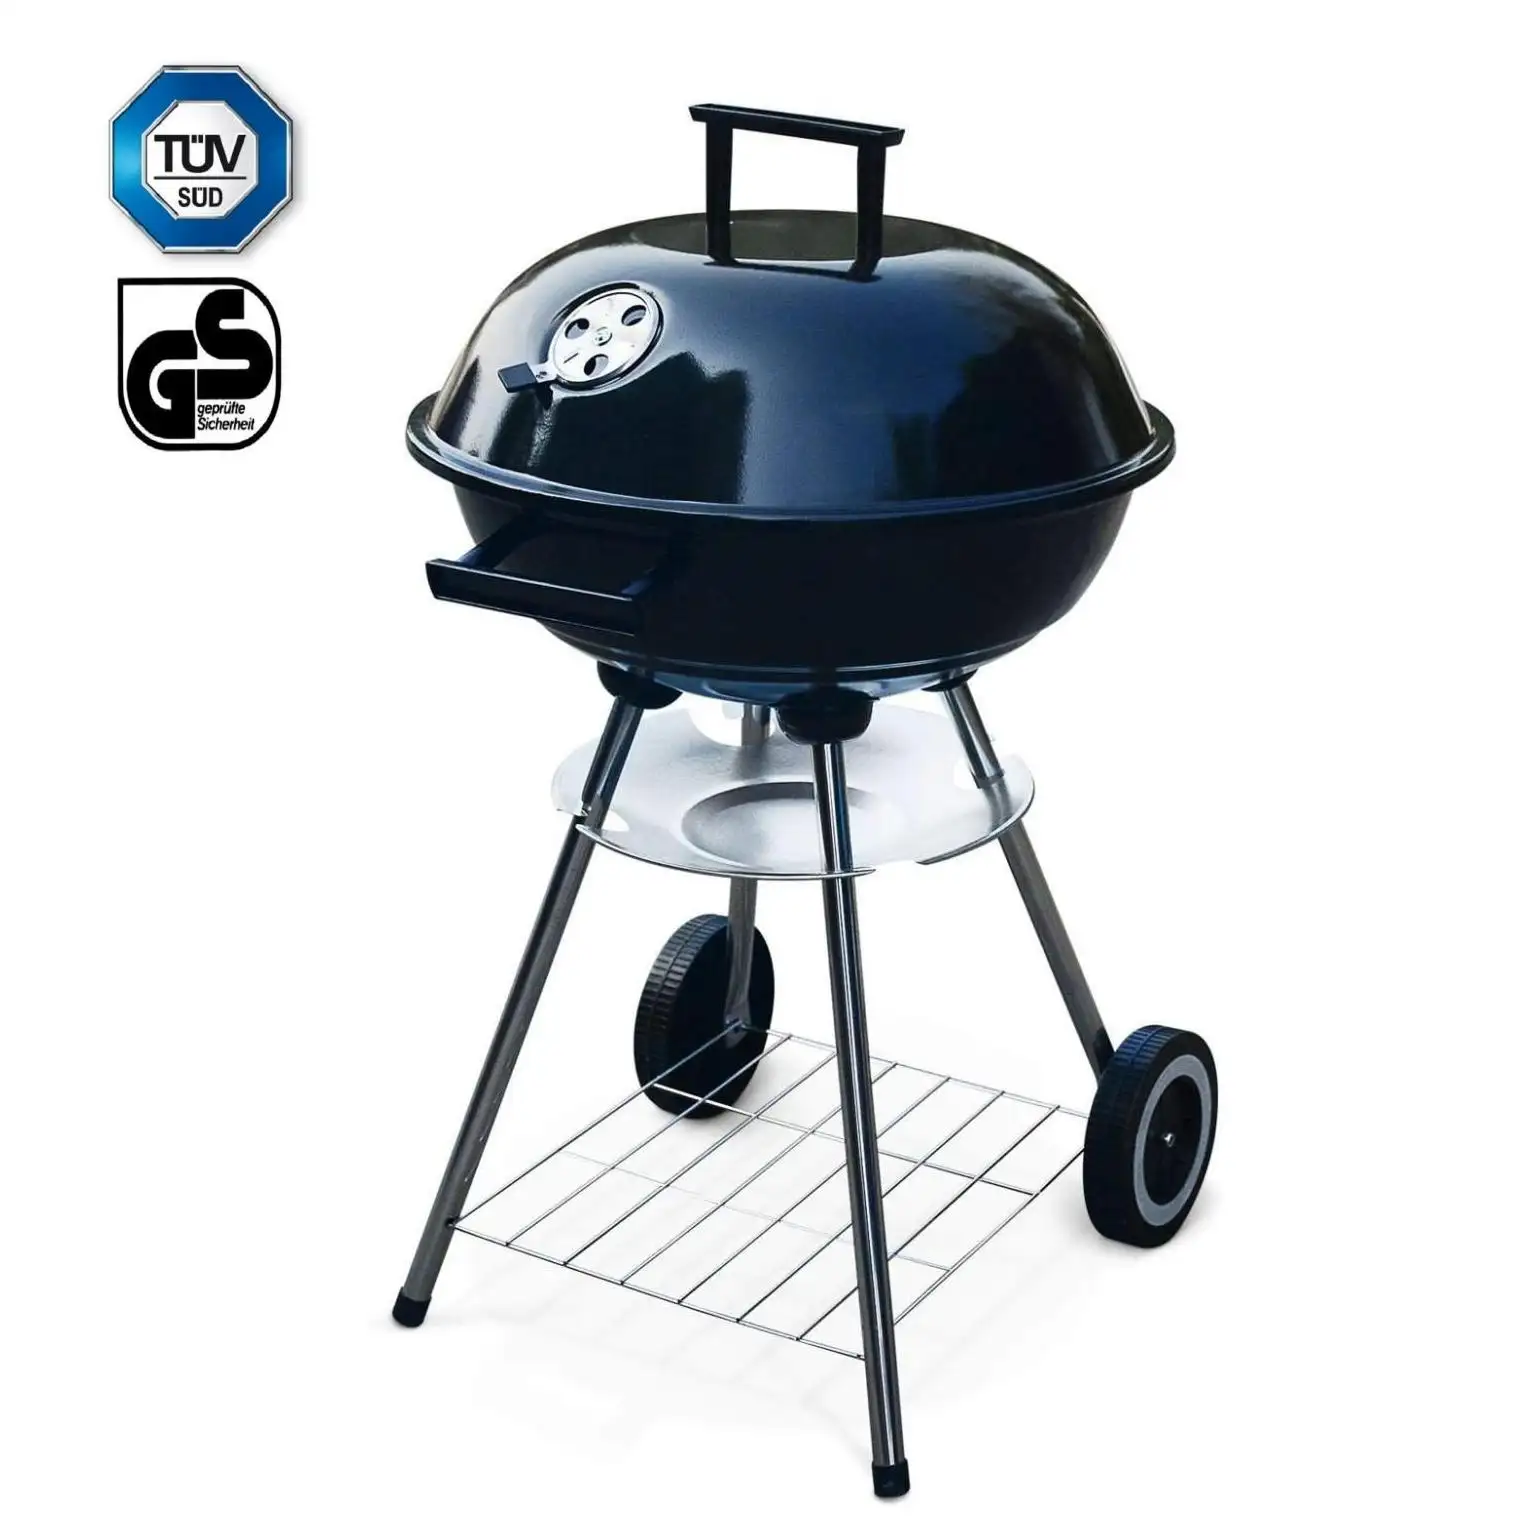 Grill Chef Portable Charcoal Barbecue Kettle Grills with ash pan